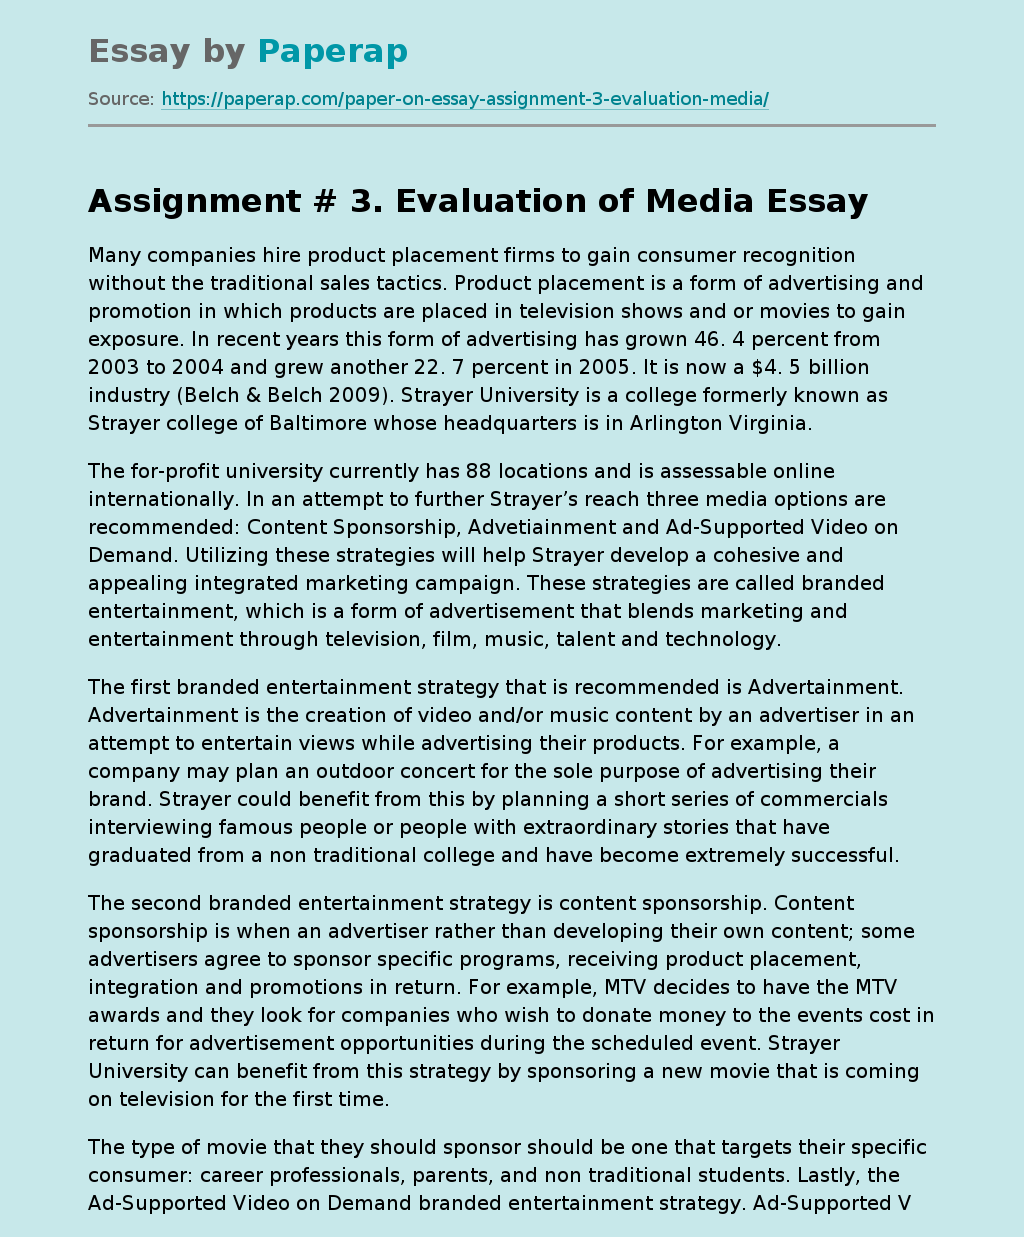 Evaluation of Media: Branded Entertainment Strategy